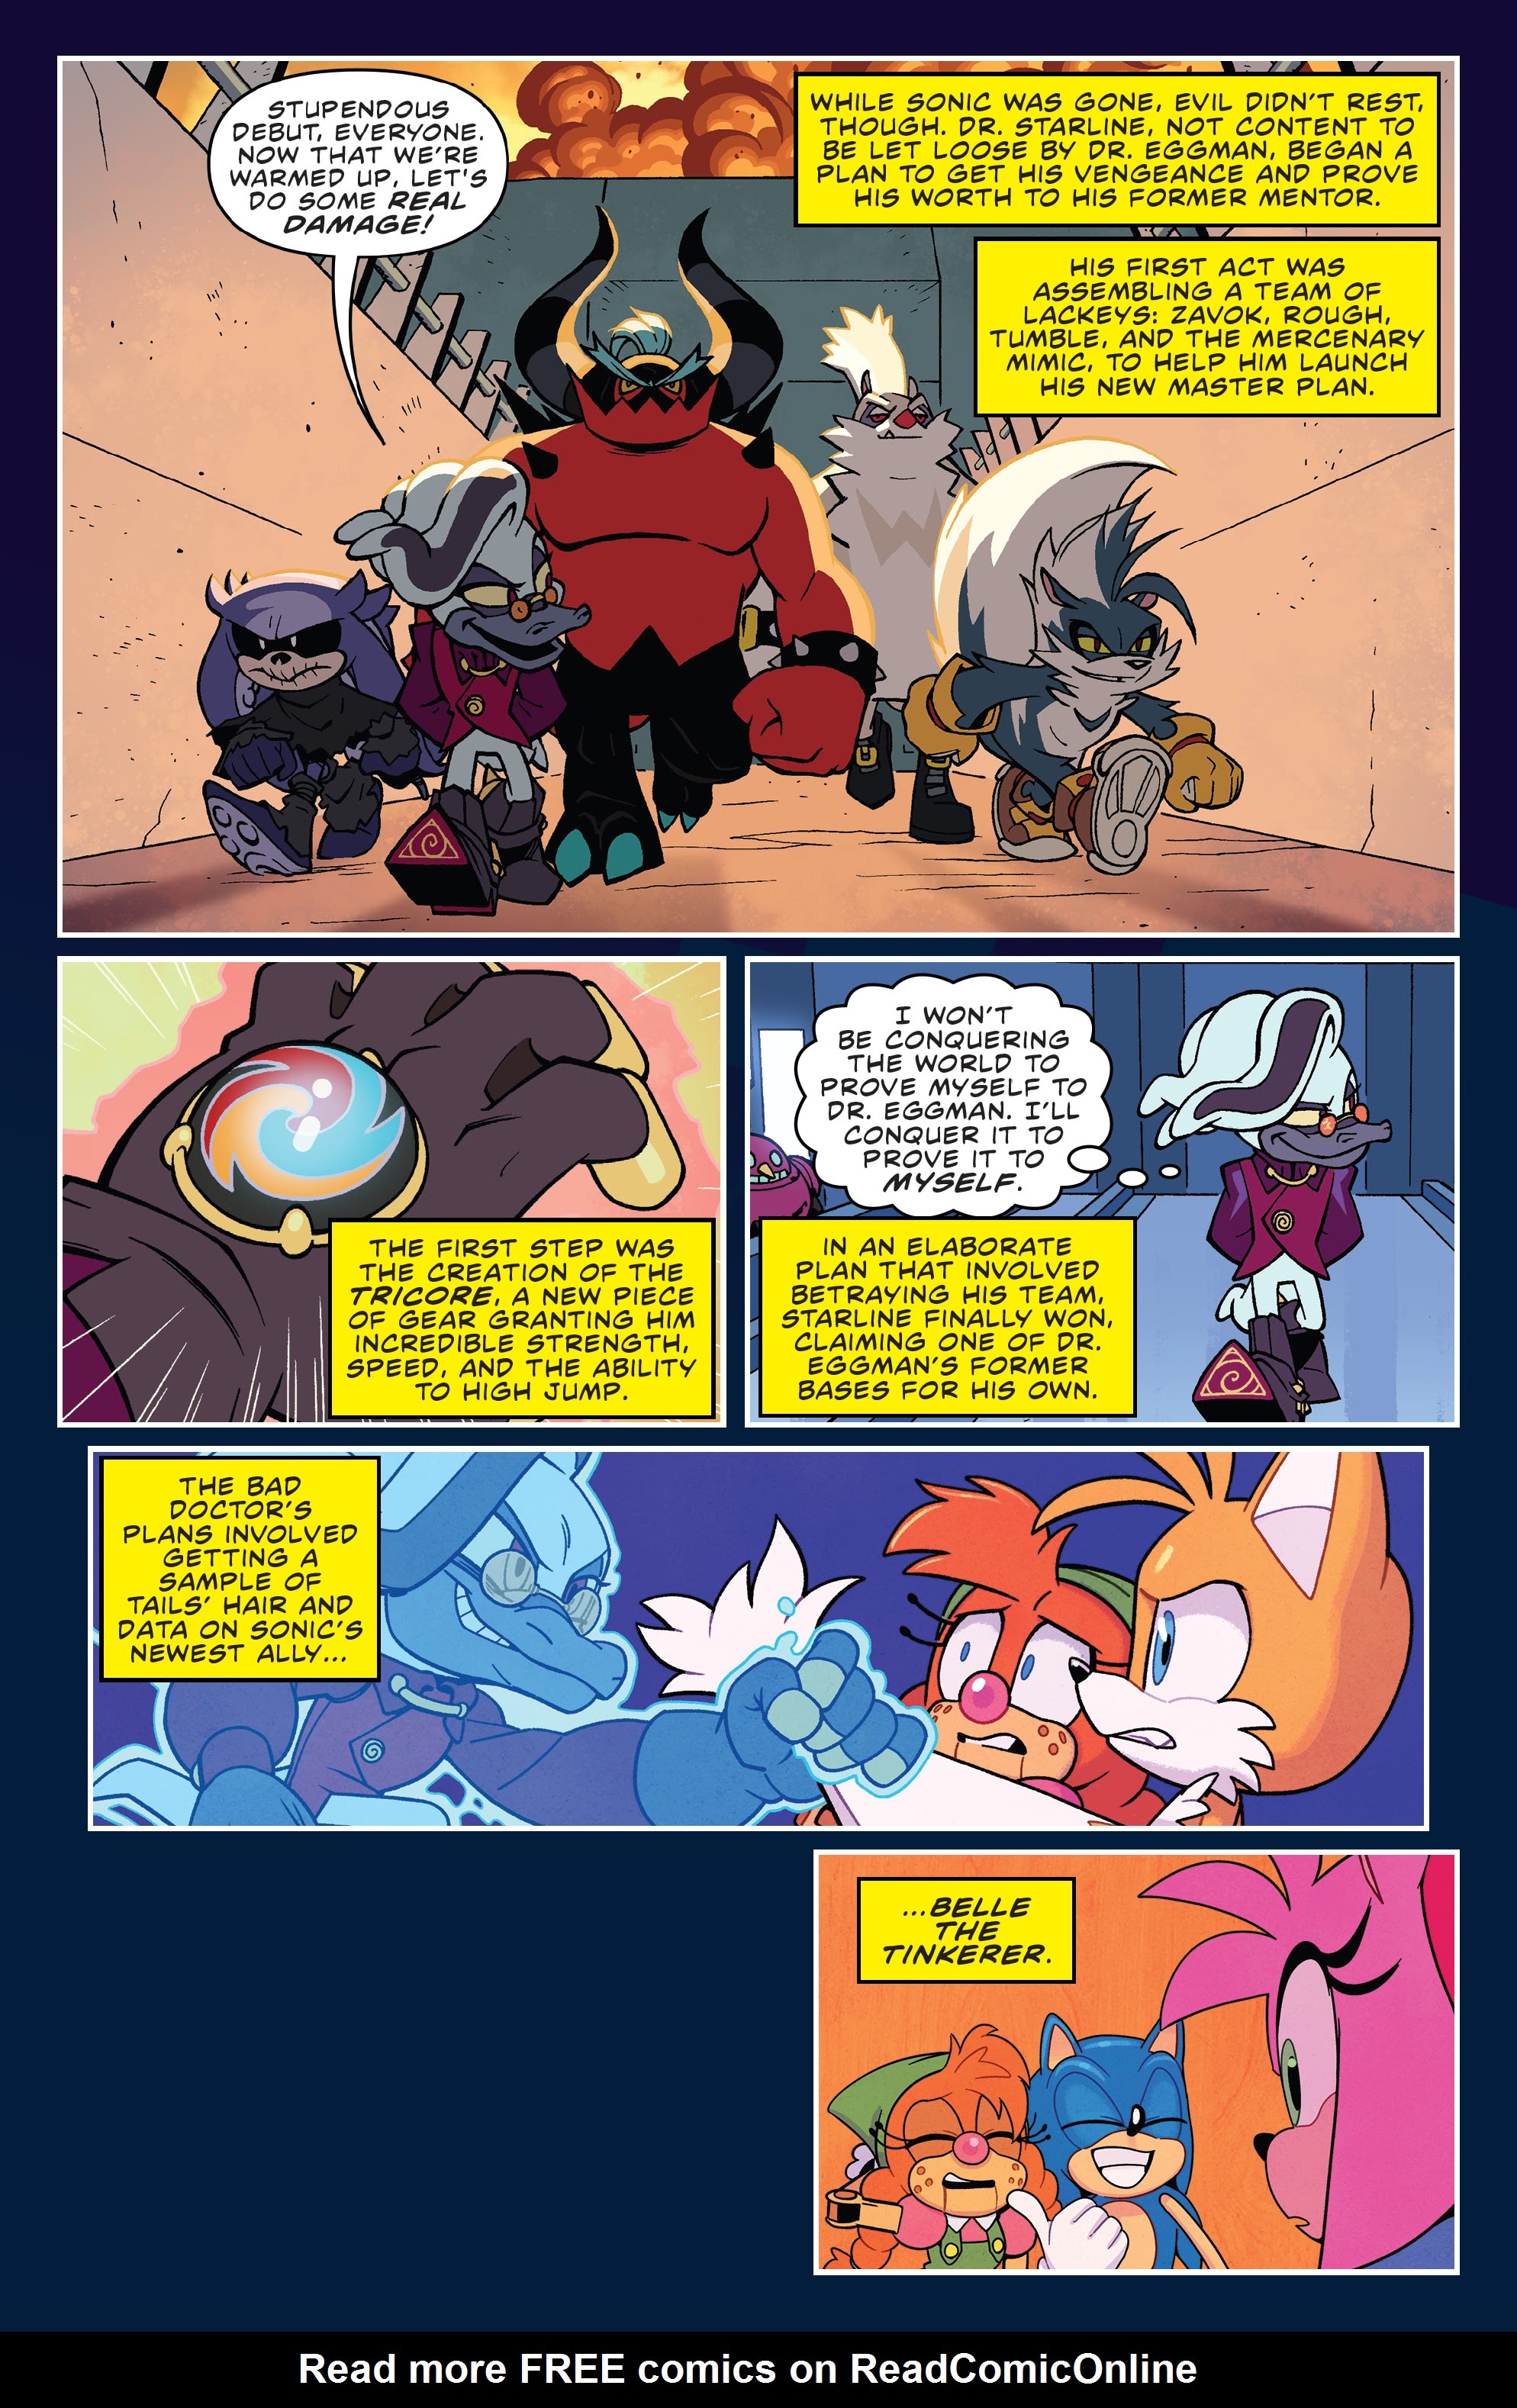 Read online Free Comic Book Day 2021 comic -  Issue # Sonic the Hedgehog 30th Anniversary Special - 22